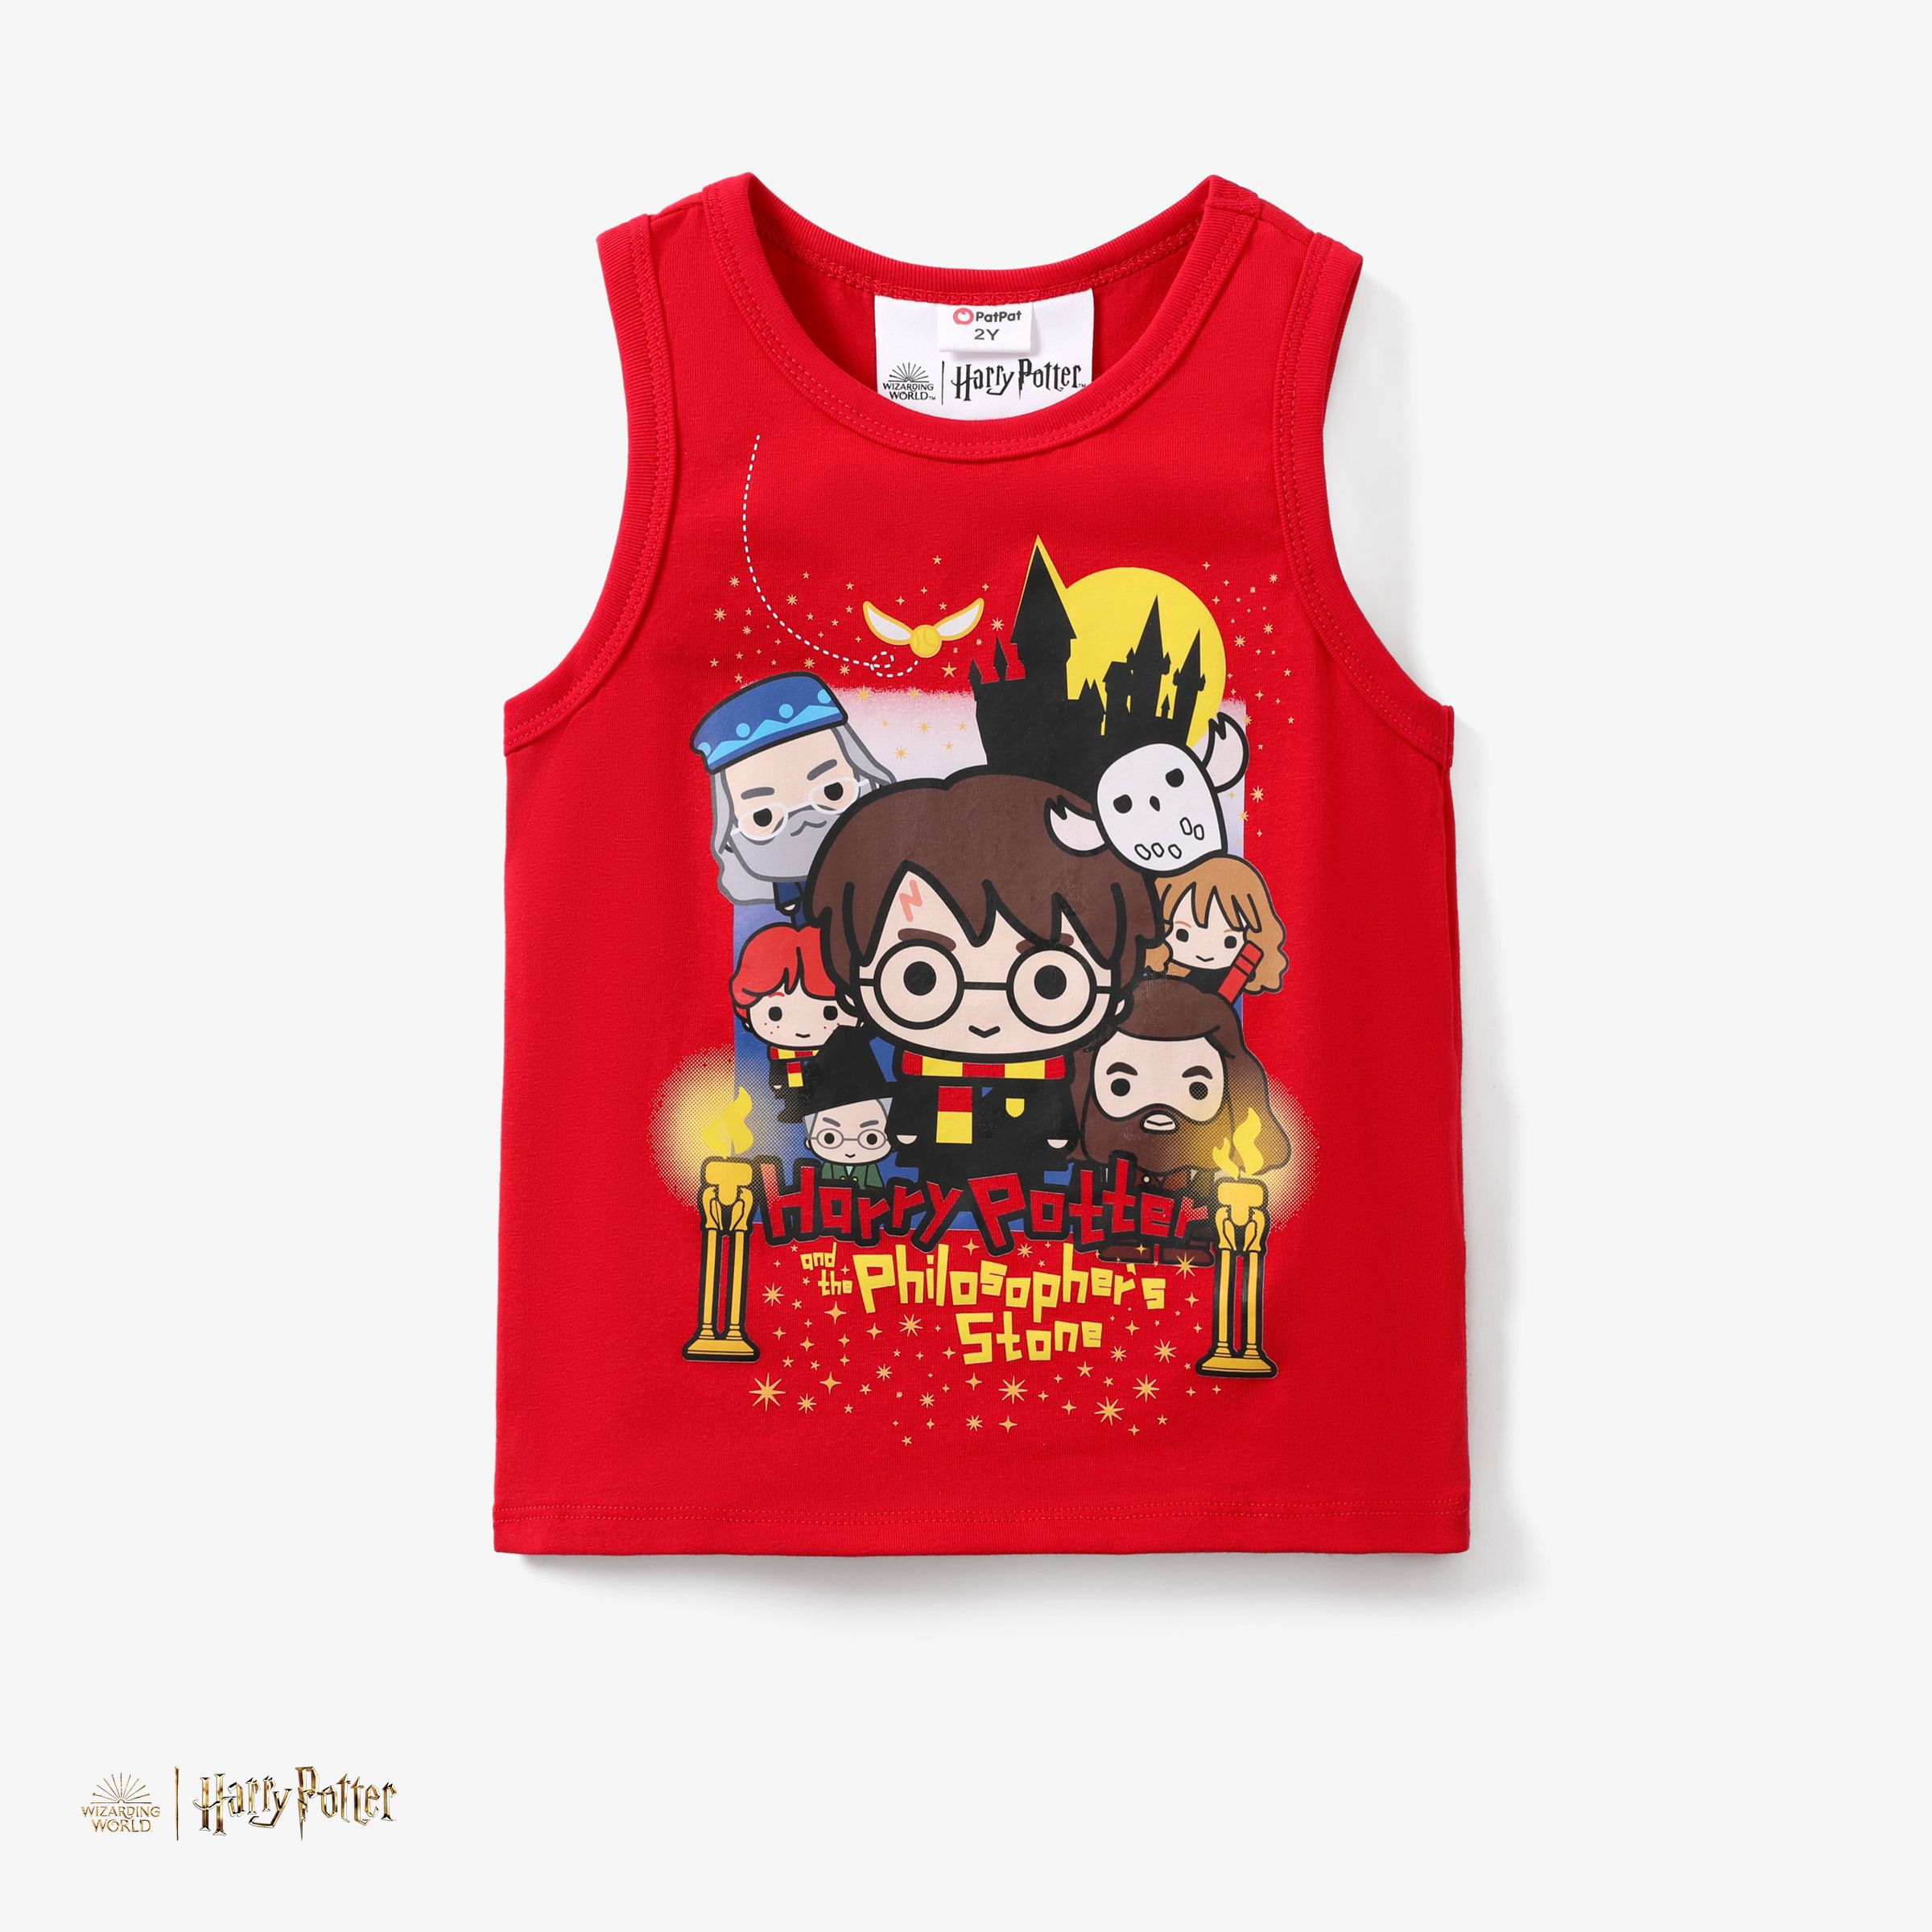 Hary Potter 1pc Toddler Boys Character All-over Print Sporty T-shirt/Tank Top/Shorts